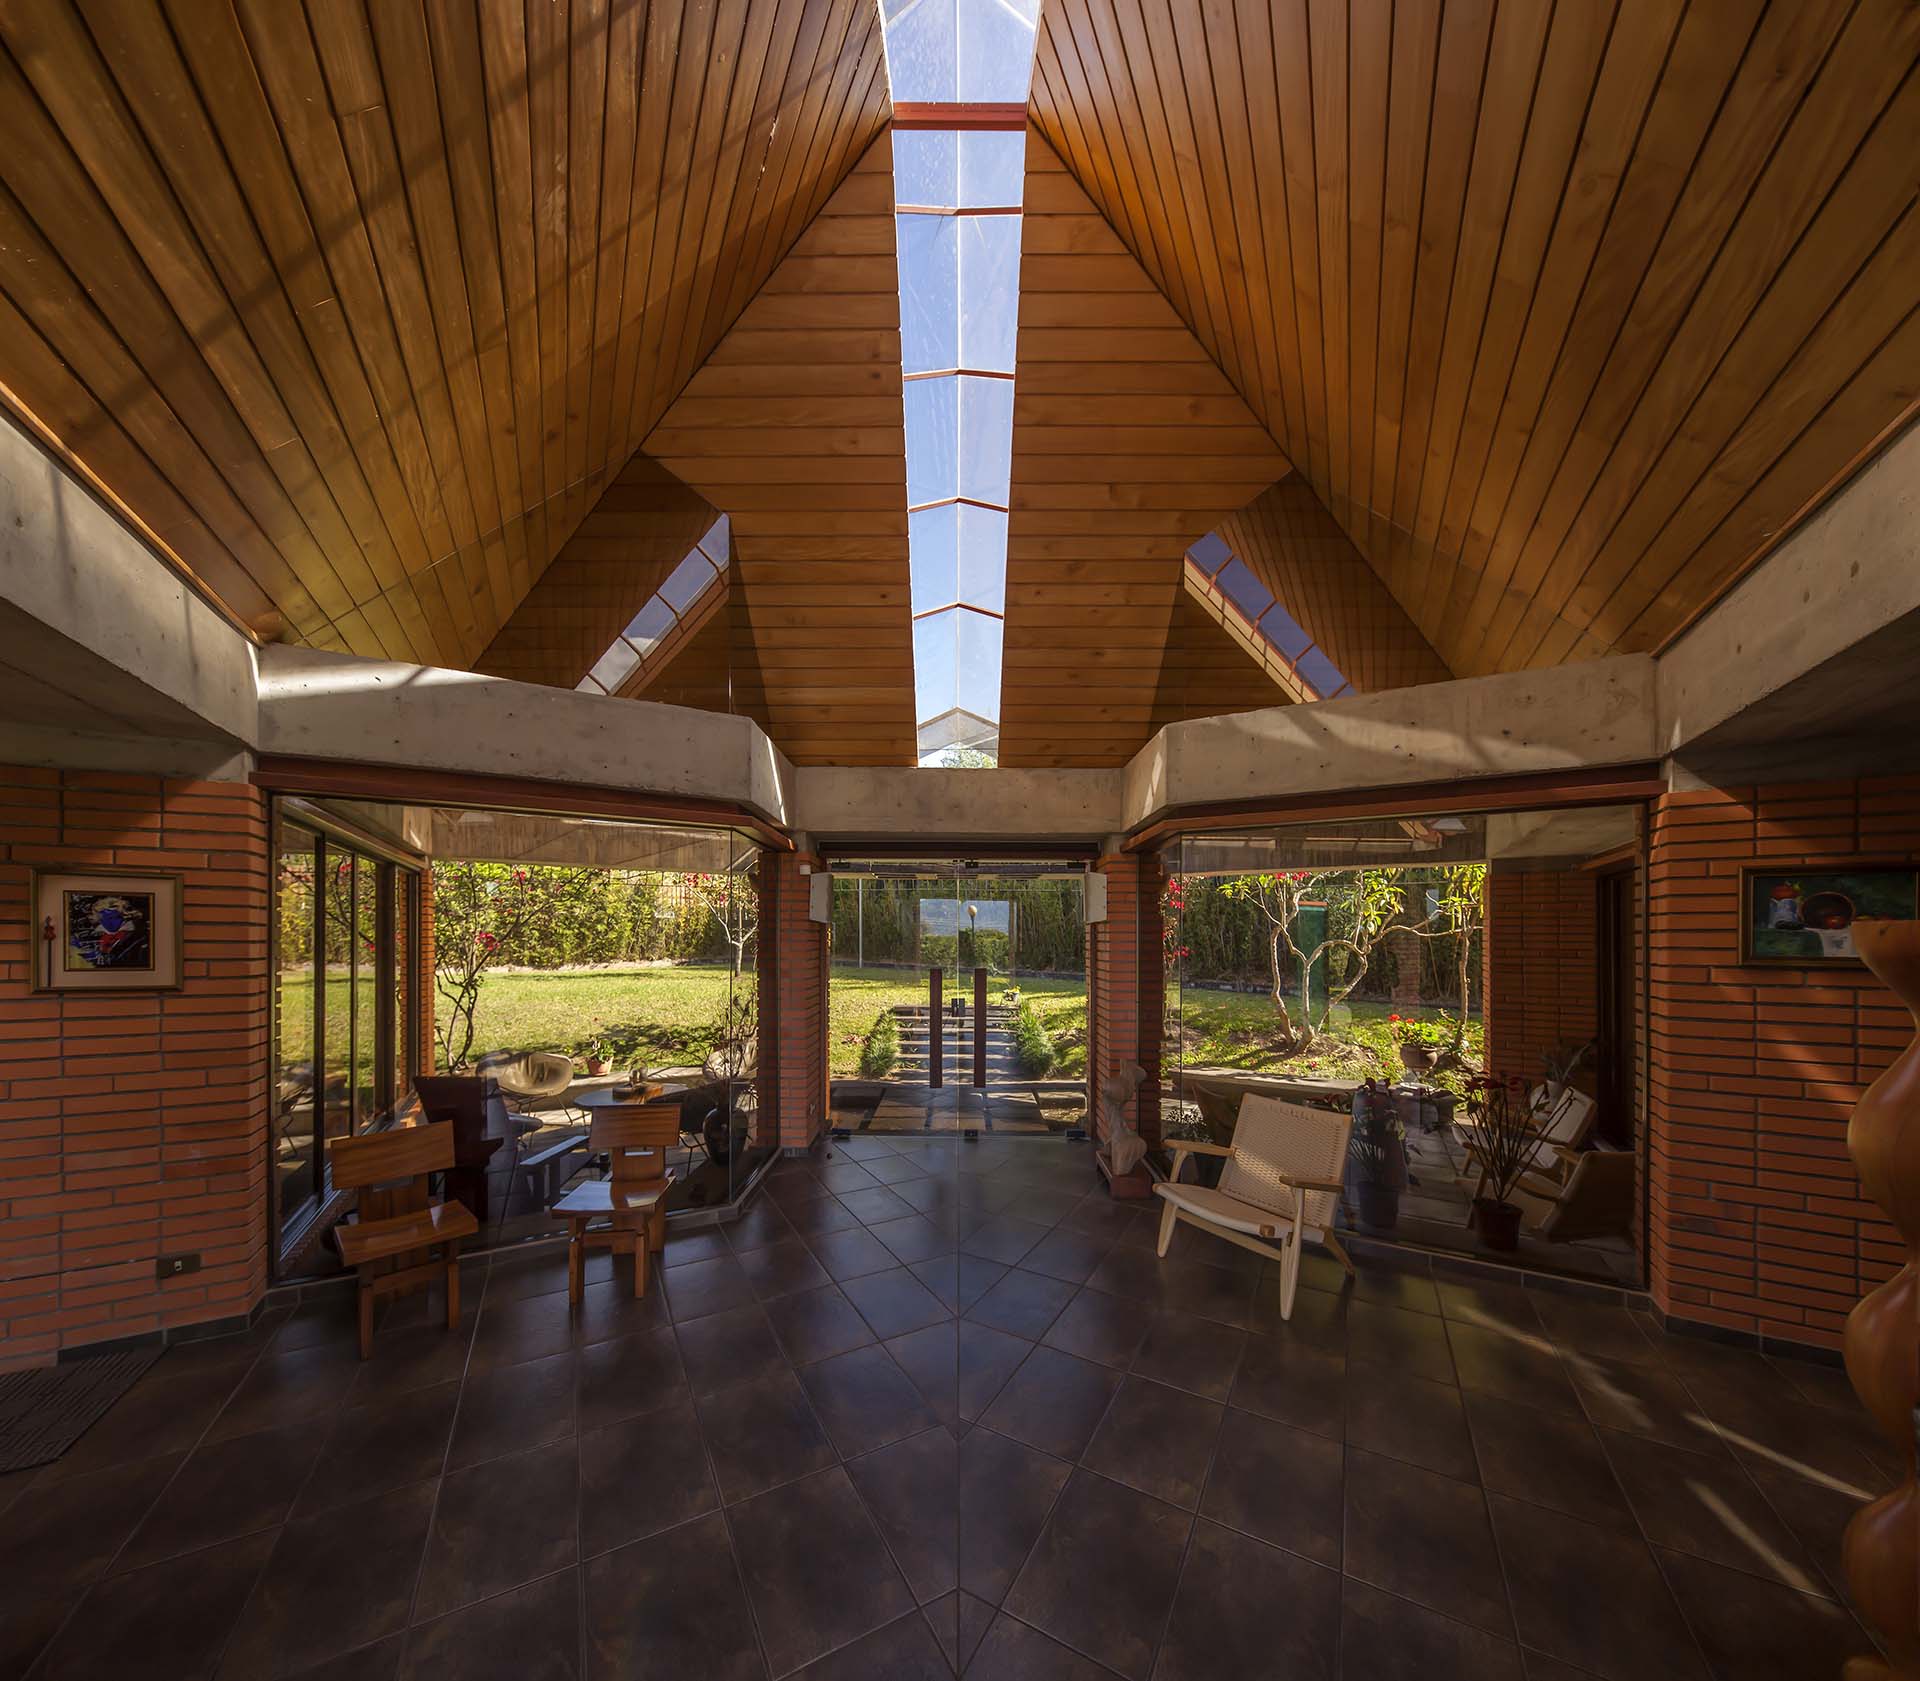 Symmetrical view from within the Soto House lobby, looking out towards dual terraces and the back garden. The dark grey floor, wooden ceilings with skylight, and wooden chairs built by the owner, exemplify Costa Rican architectural design